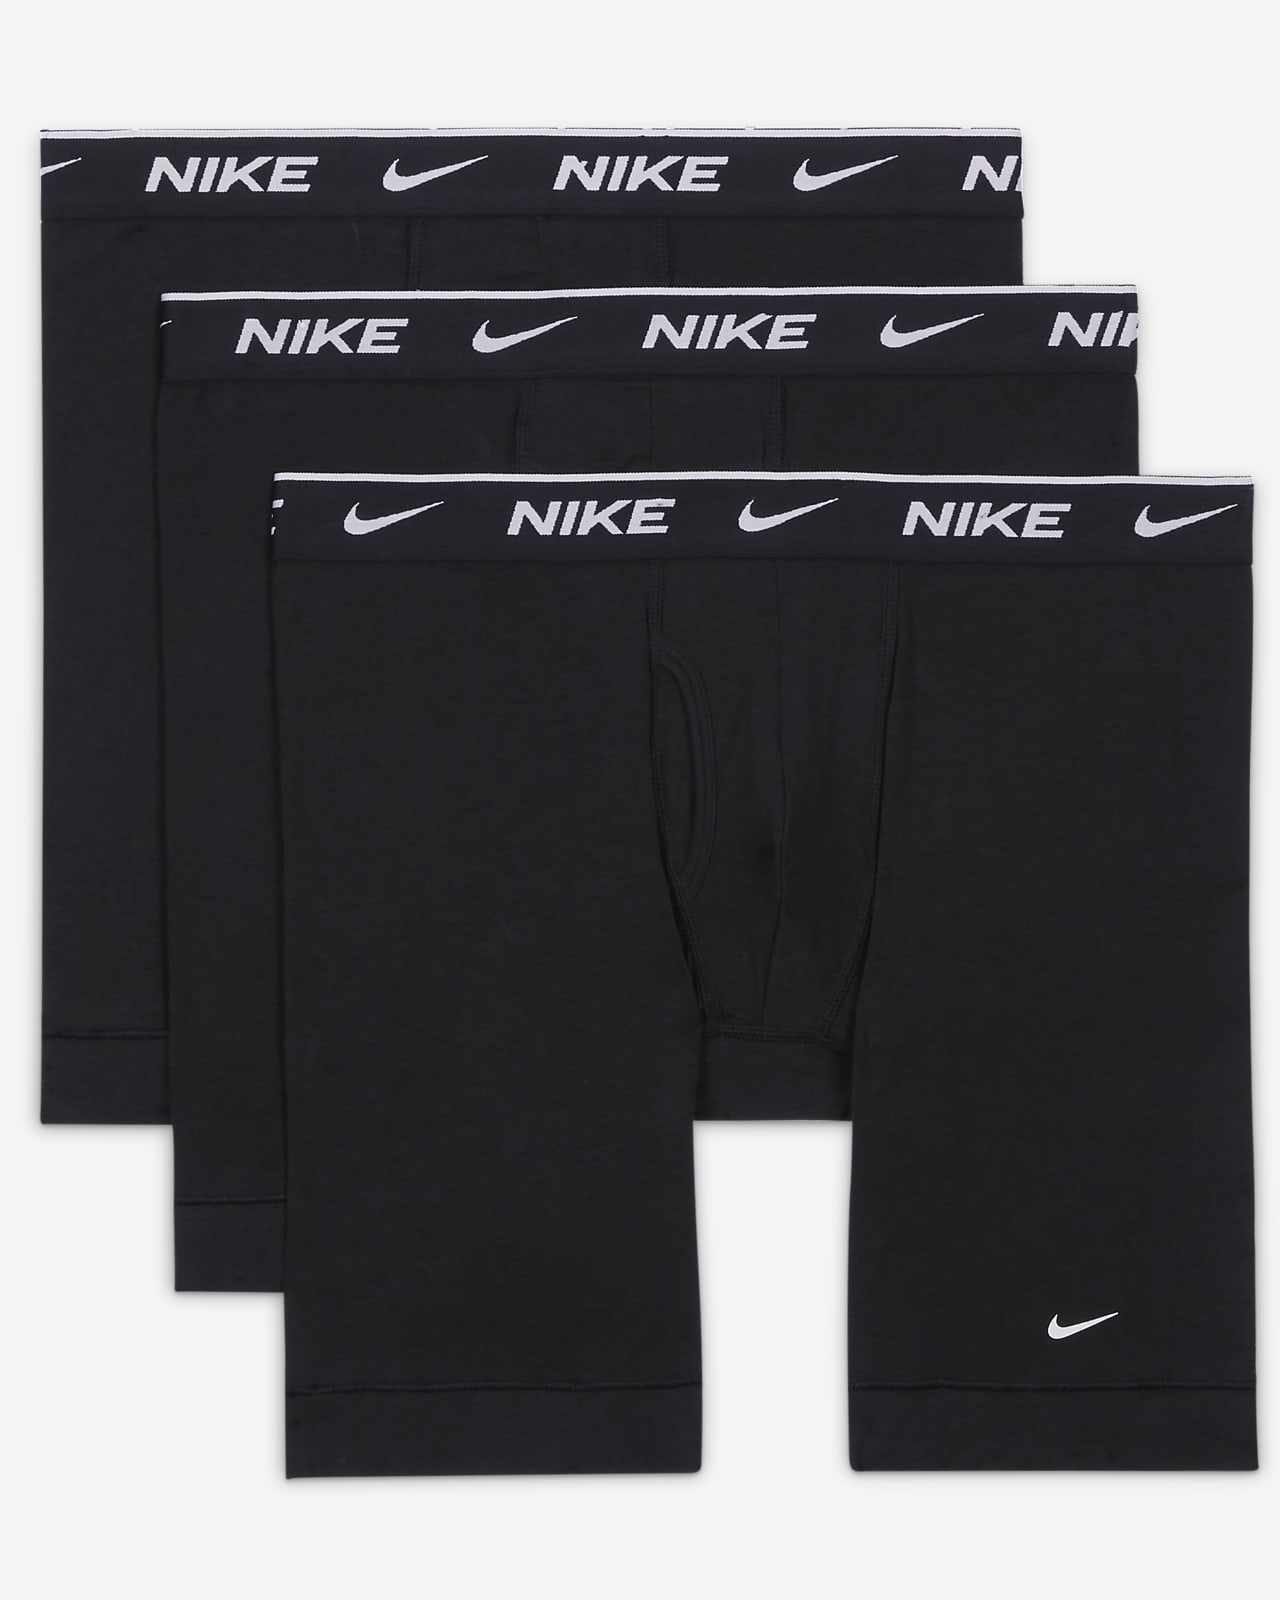 Nike Dri-FIT Essential Cotton Stretch 3 pack boxer briefs w. fly